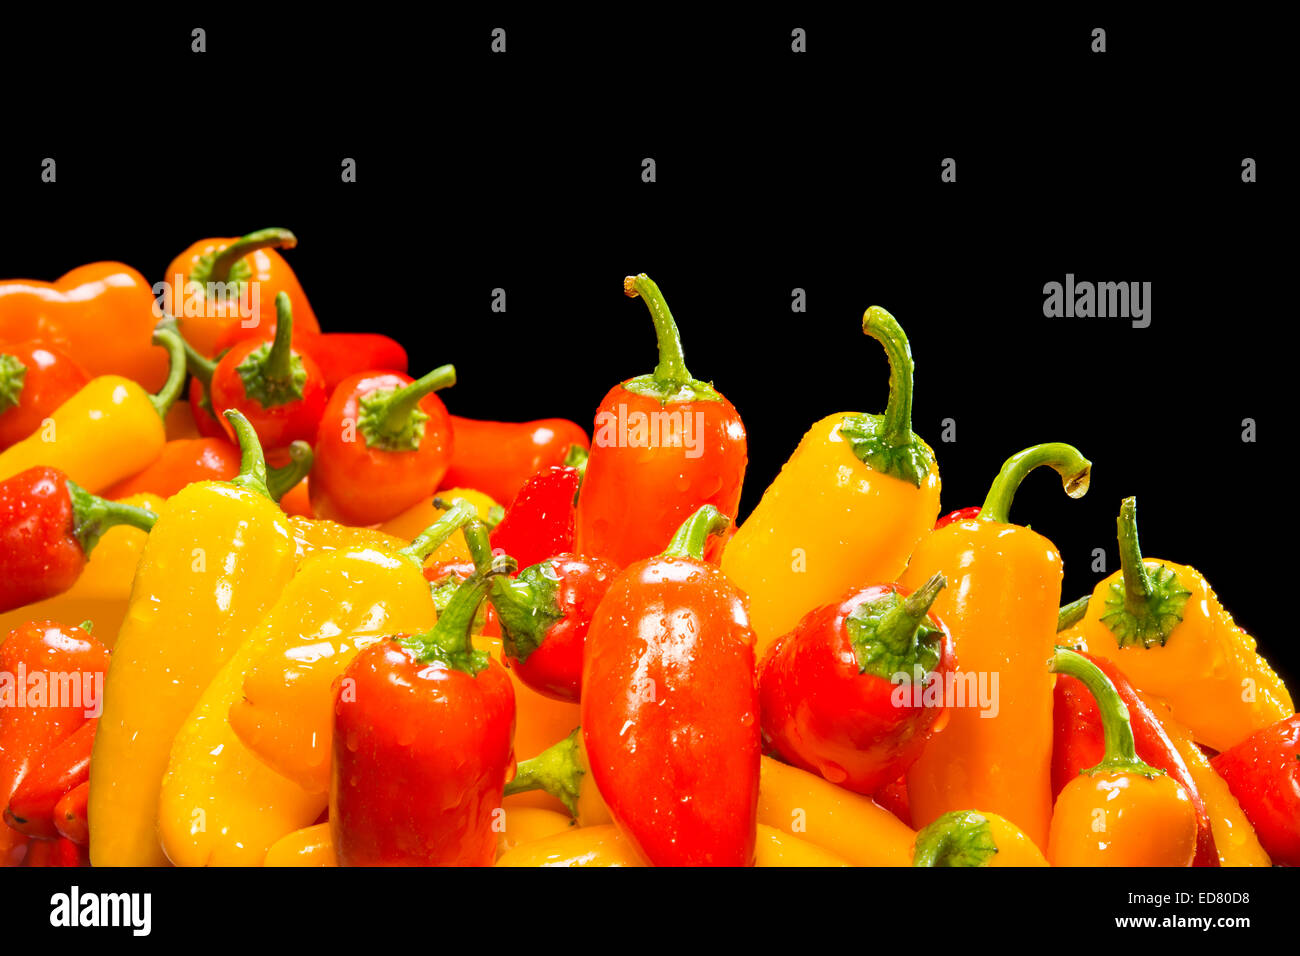 Selection of fresh, ripe red, yellow and orange peppers framed against a black background for placement of copy. Stock Photo